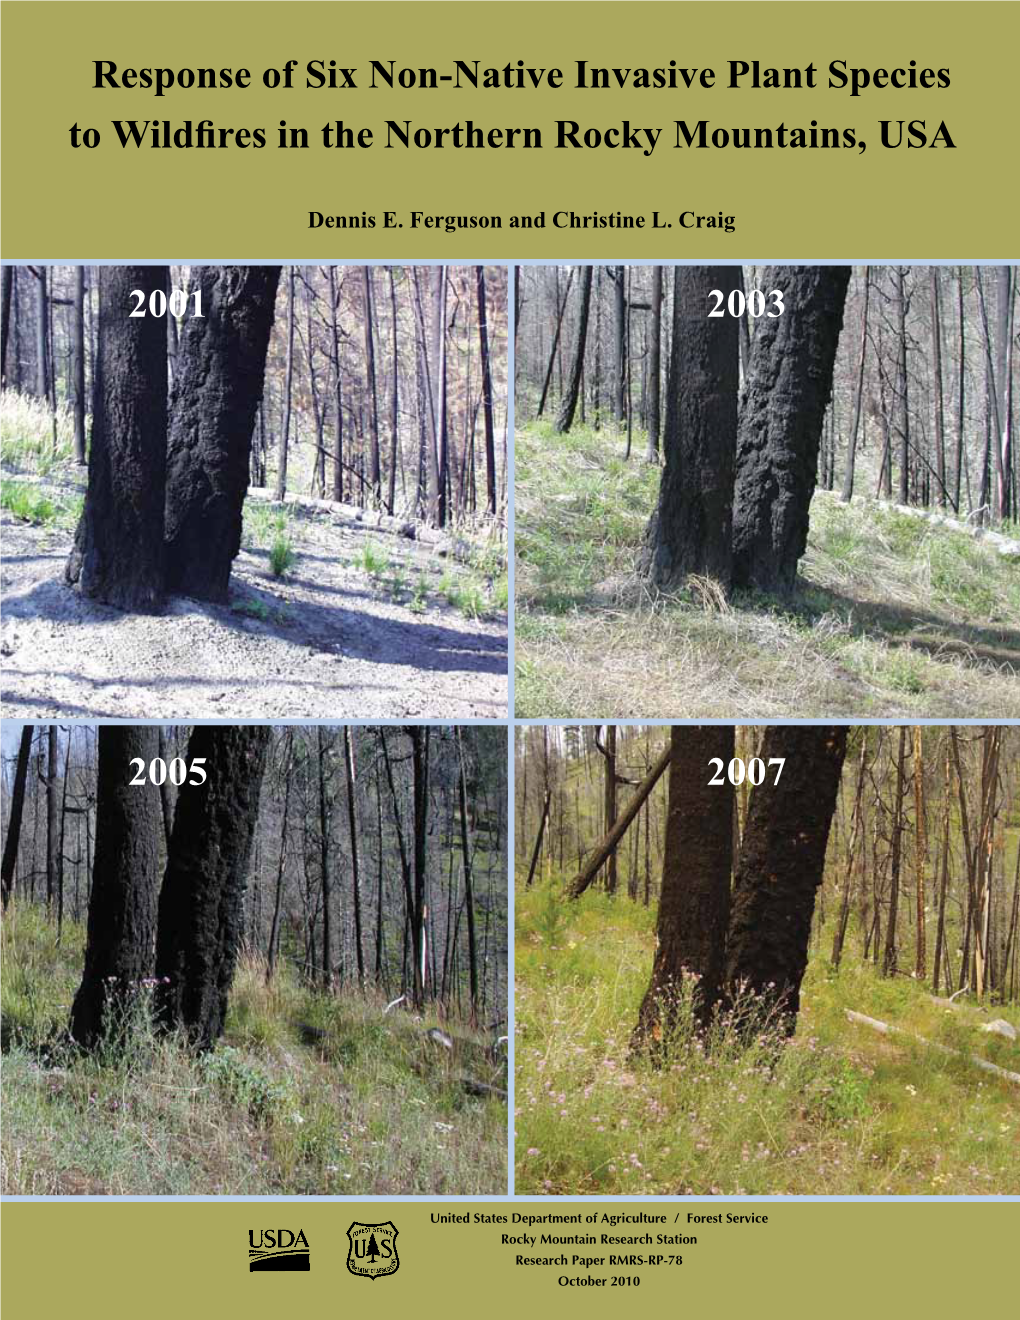 Response of Six Non-Native Plant Species to Wildfires in the Northern Rocky Mountains, USA